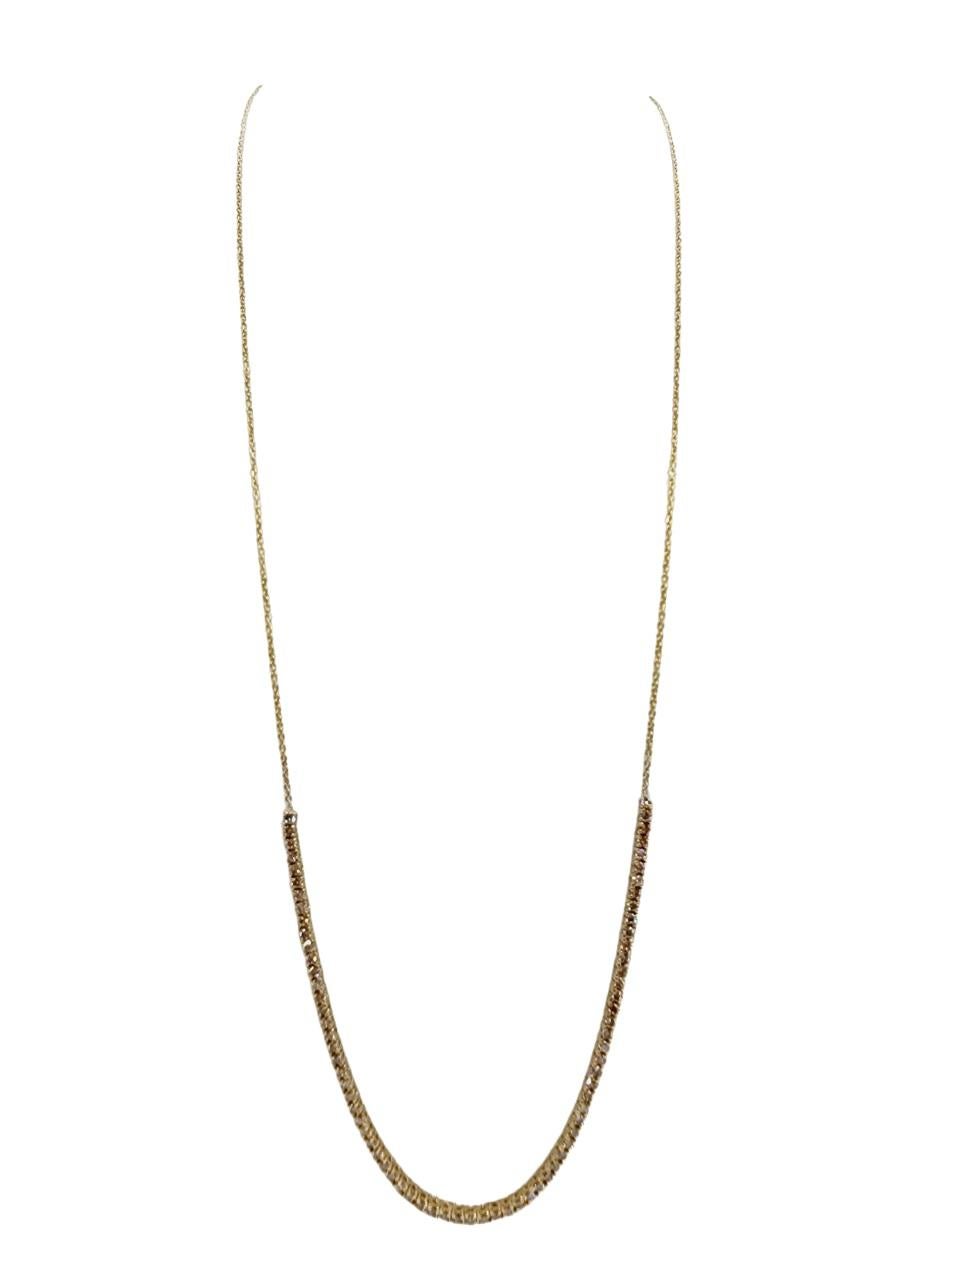 1.65 Carat Mini Diamond Necklace Chain 14 Karat Yellow Gold 18'' In New Condition For Sale In Great Neck, NY